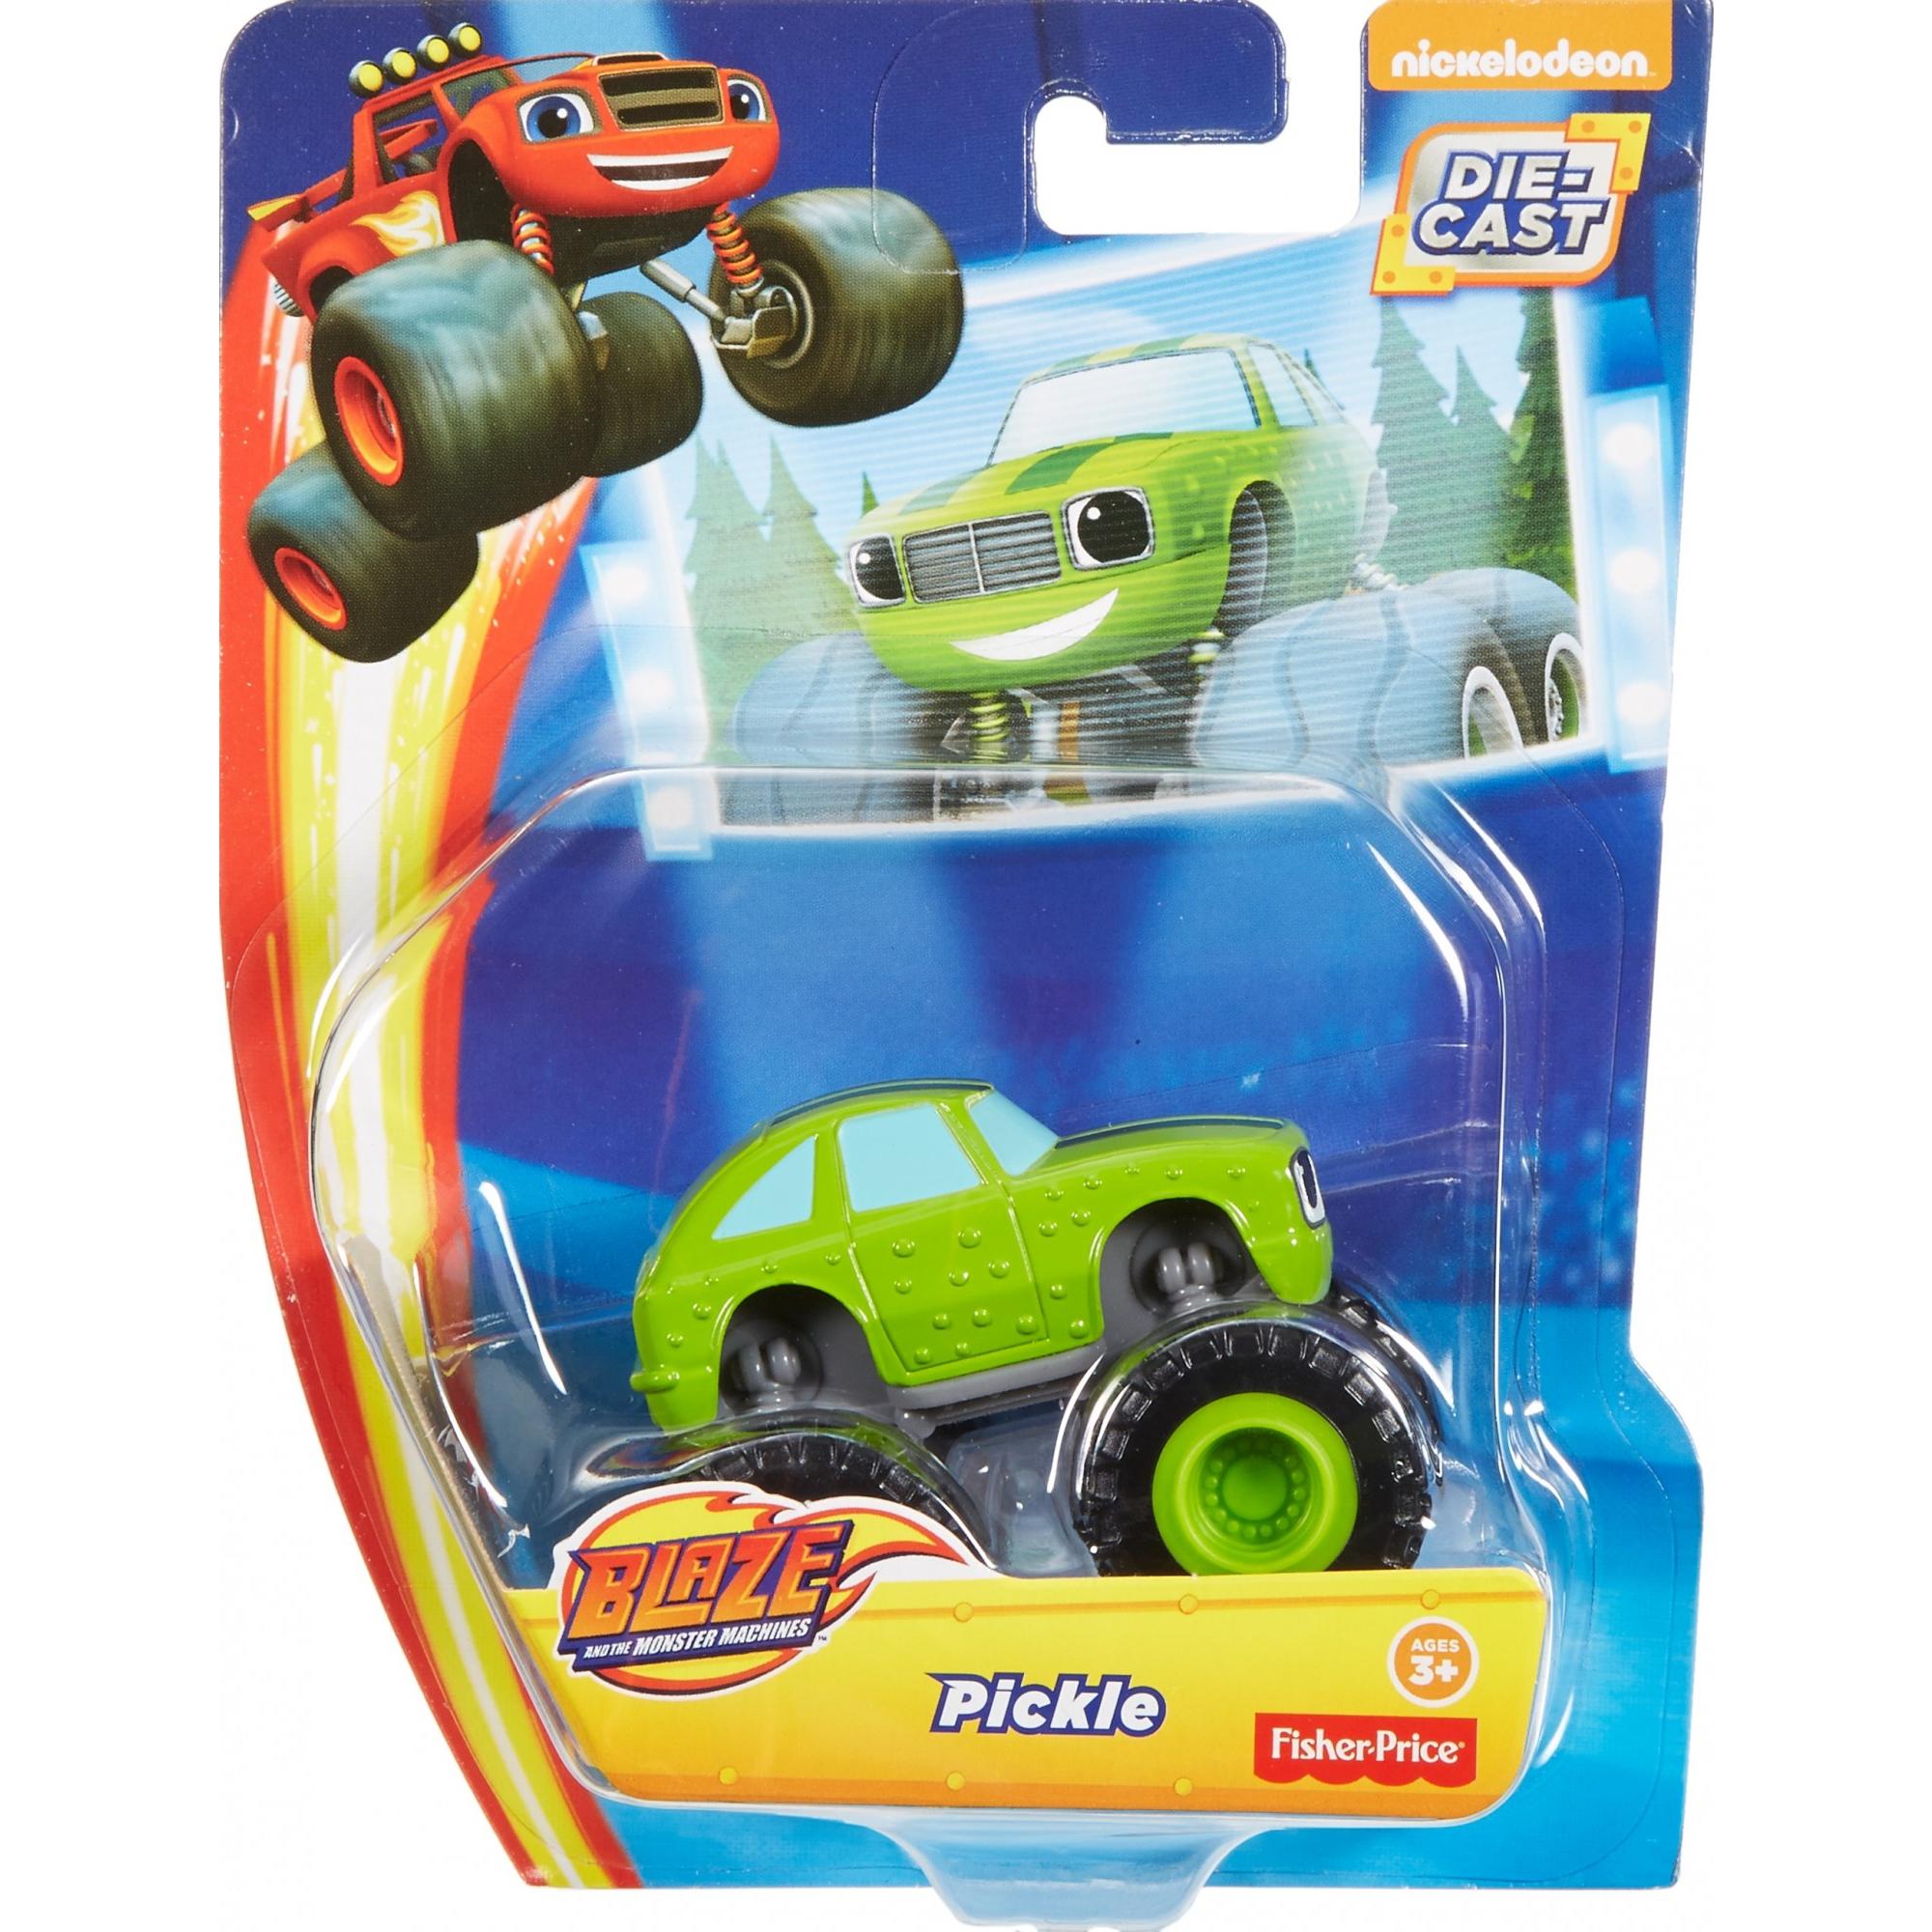 Nickelodeon Blaze and the Monster Machines Pickle Vehicle - image 2 of 3